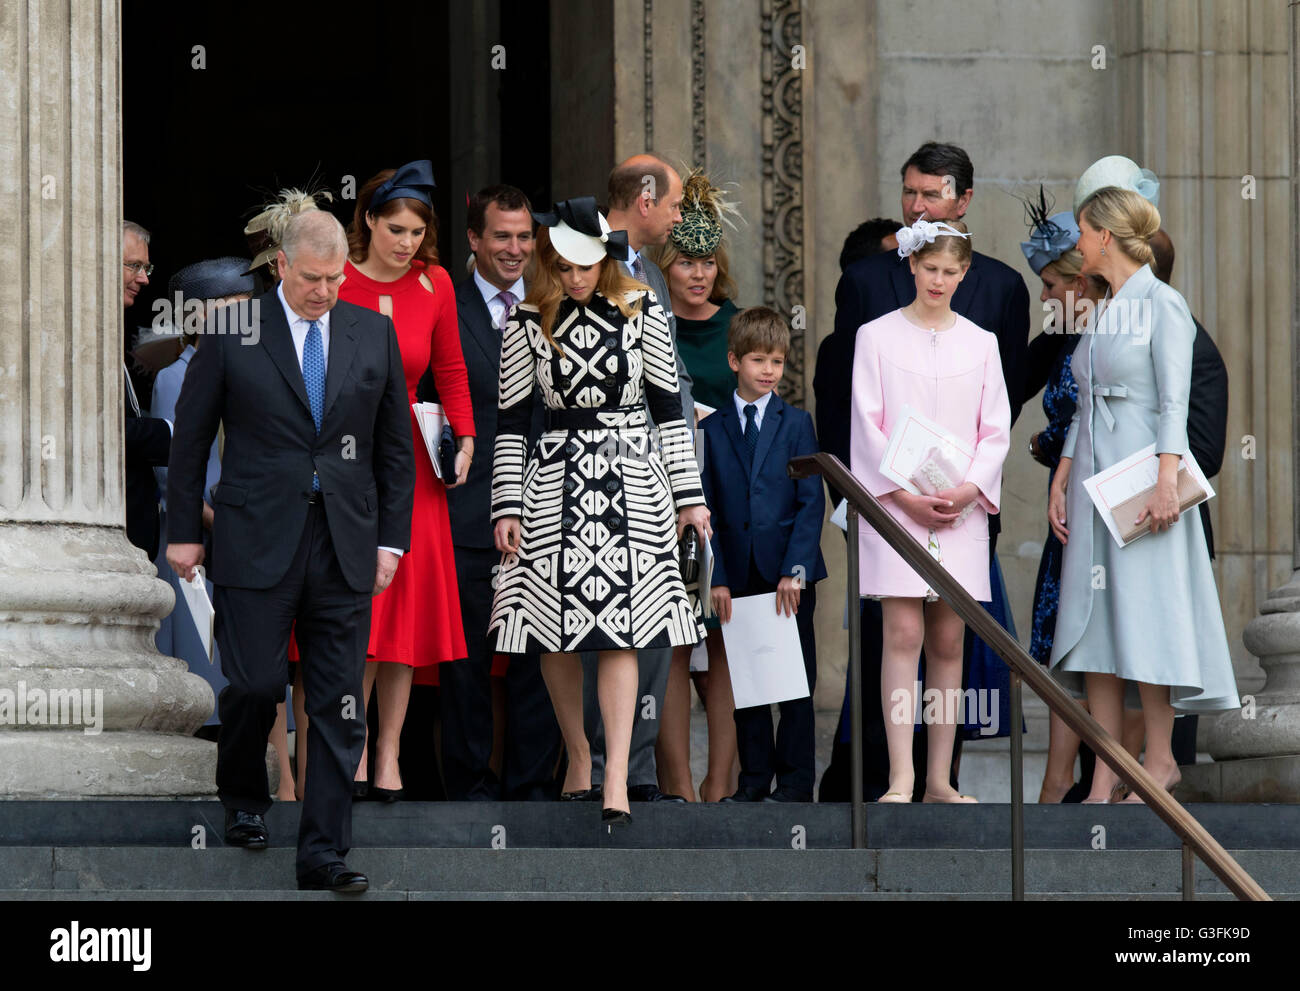 London, UK. 10th June, 2016. Prince Andrew, Princess Eugenie, Princess Beatrice, James, Viscount Severn, Lady Louise Windsor and Sophie, Countess of Wessex Departure Members of the British Royal Family attend a National Service of Thanksgiving to mark Queen's Elisabeth 90th birthday at St Paul·s Cathedral in Londen RPE/Albert Nieboer/Netherlands OUTLondon, UK. 10th June, 2016. Stock Photo